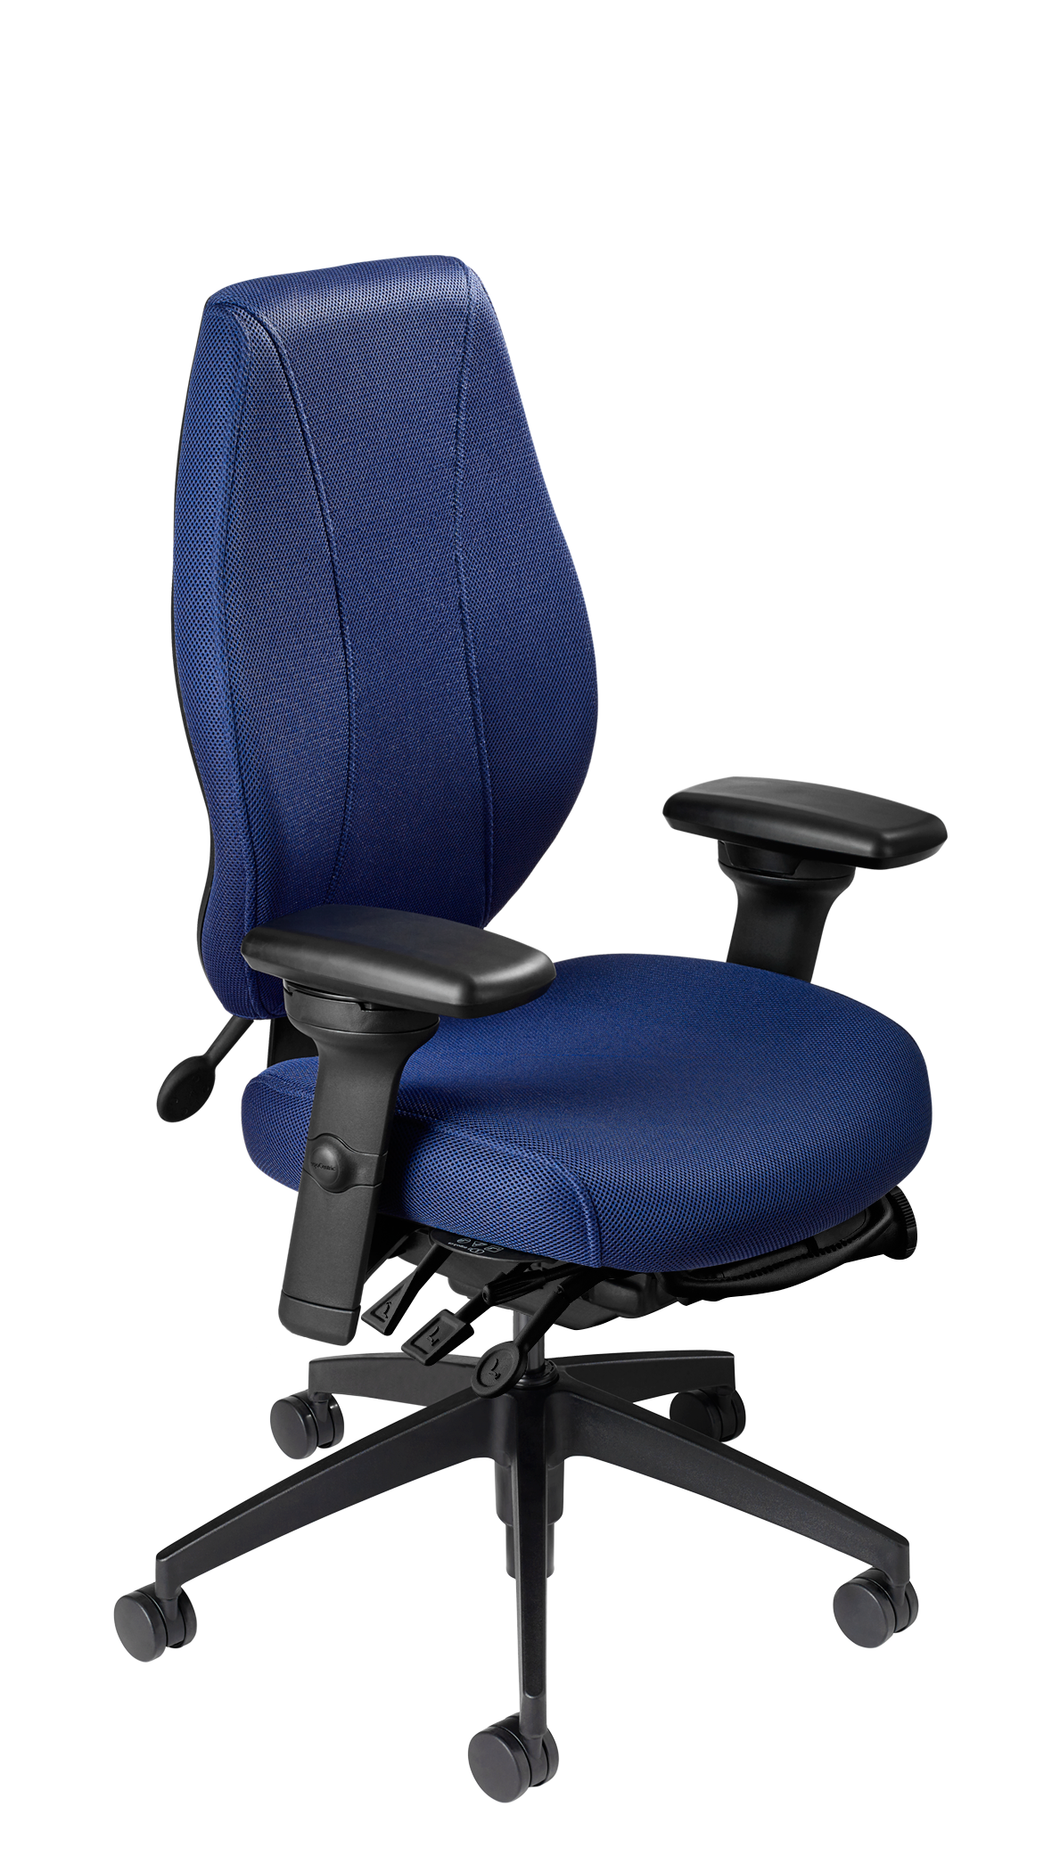 airCentric 2 with Multi Tilt Mechanism, Midnight Black Frame, AirKnit Royal Upholstery